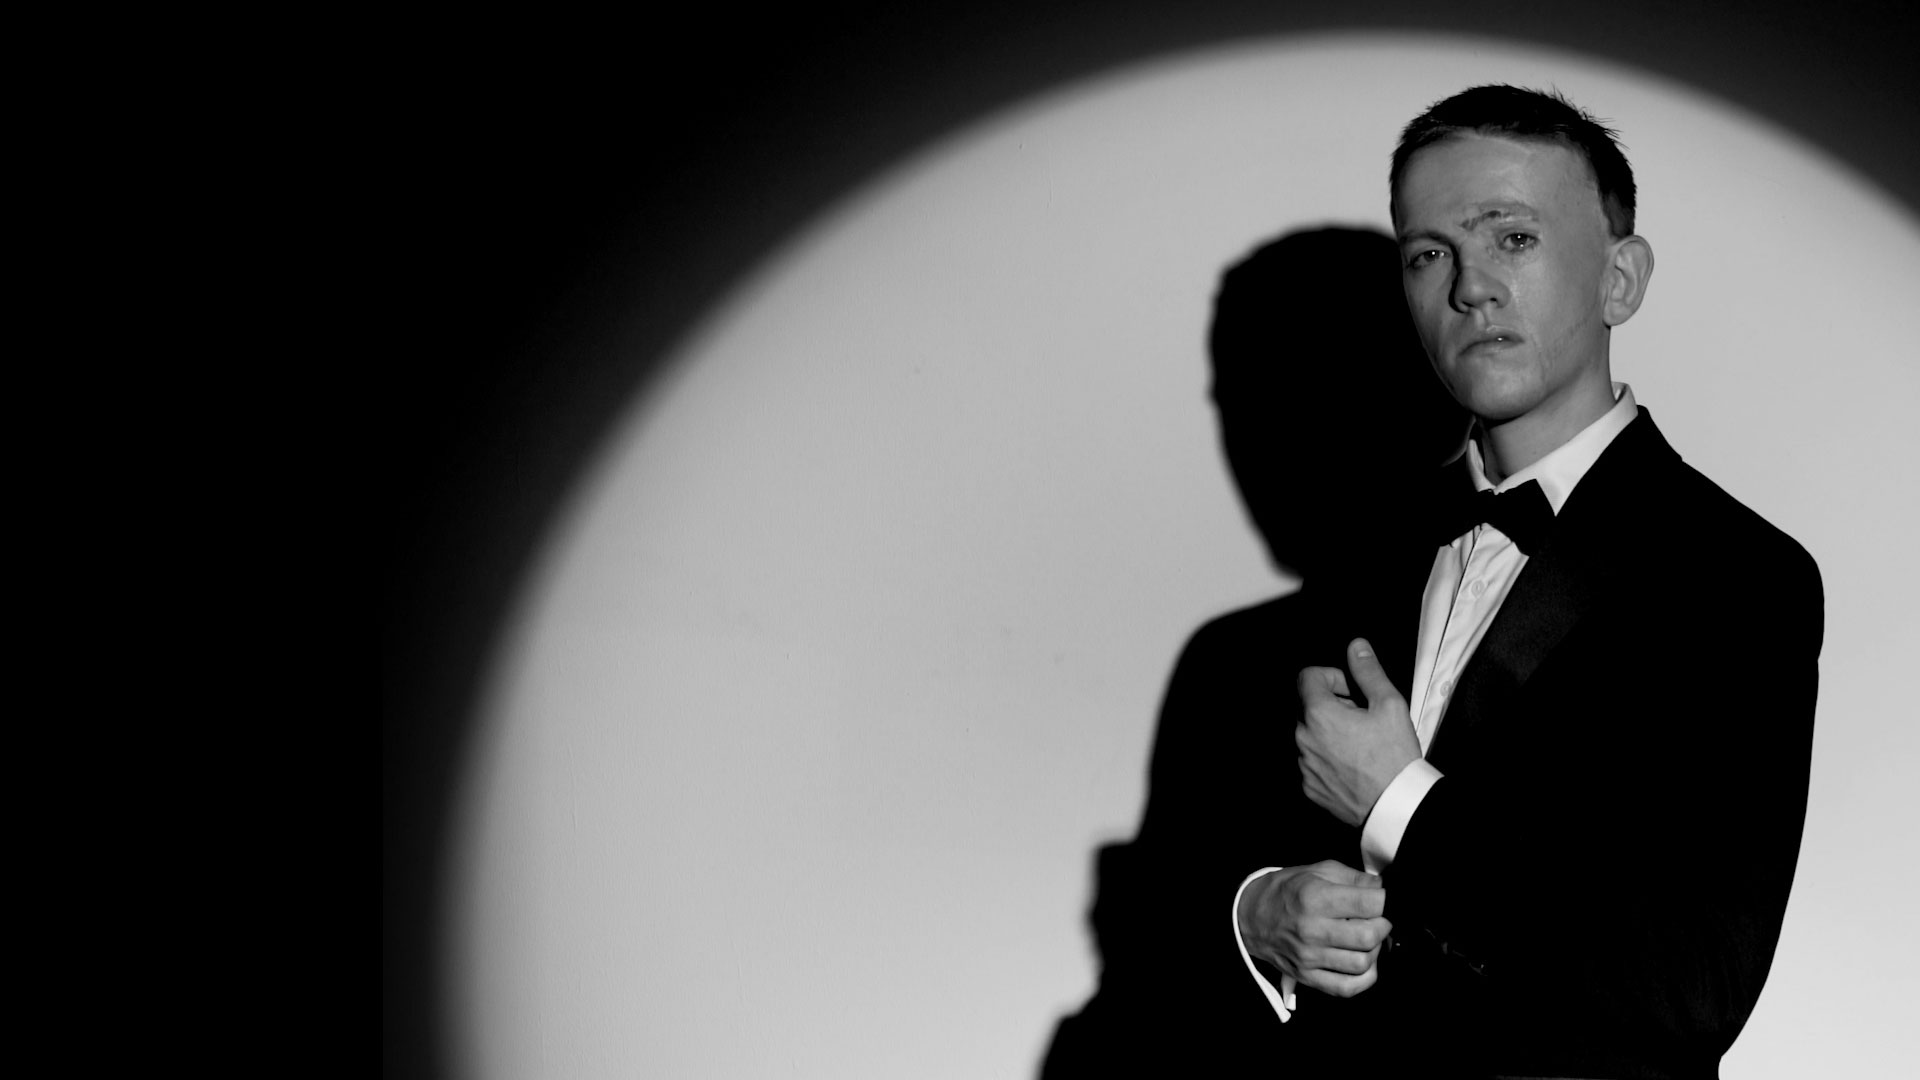 A person with a visible difference dressed as James Bond in the opening title sequence